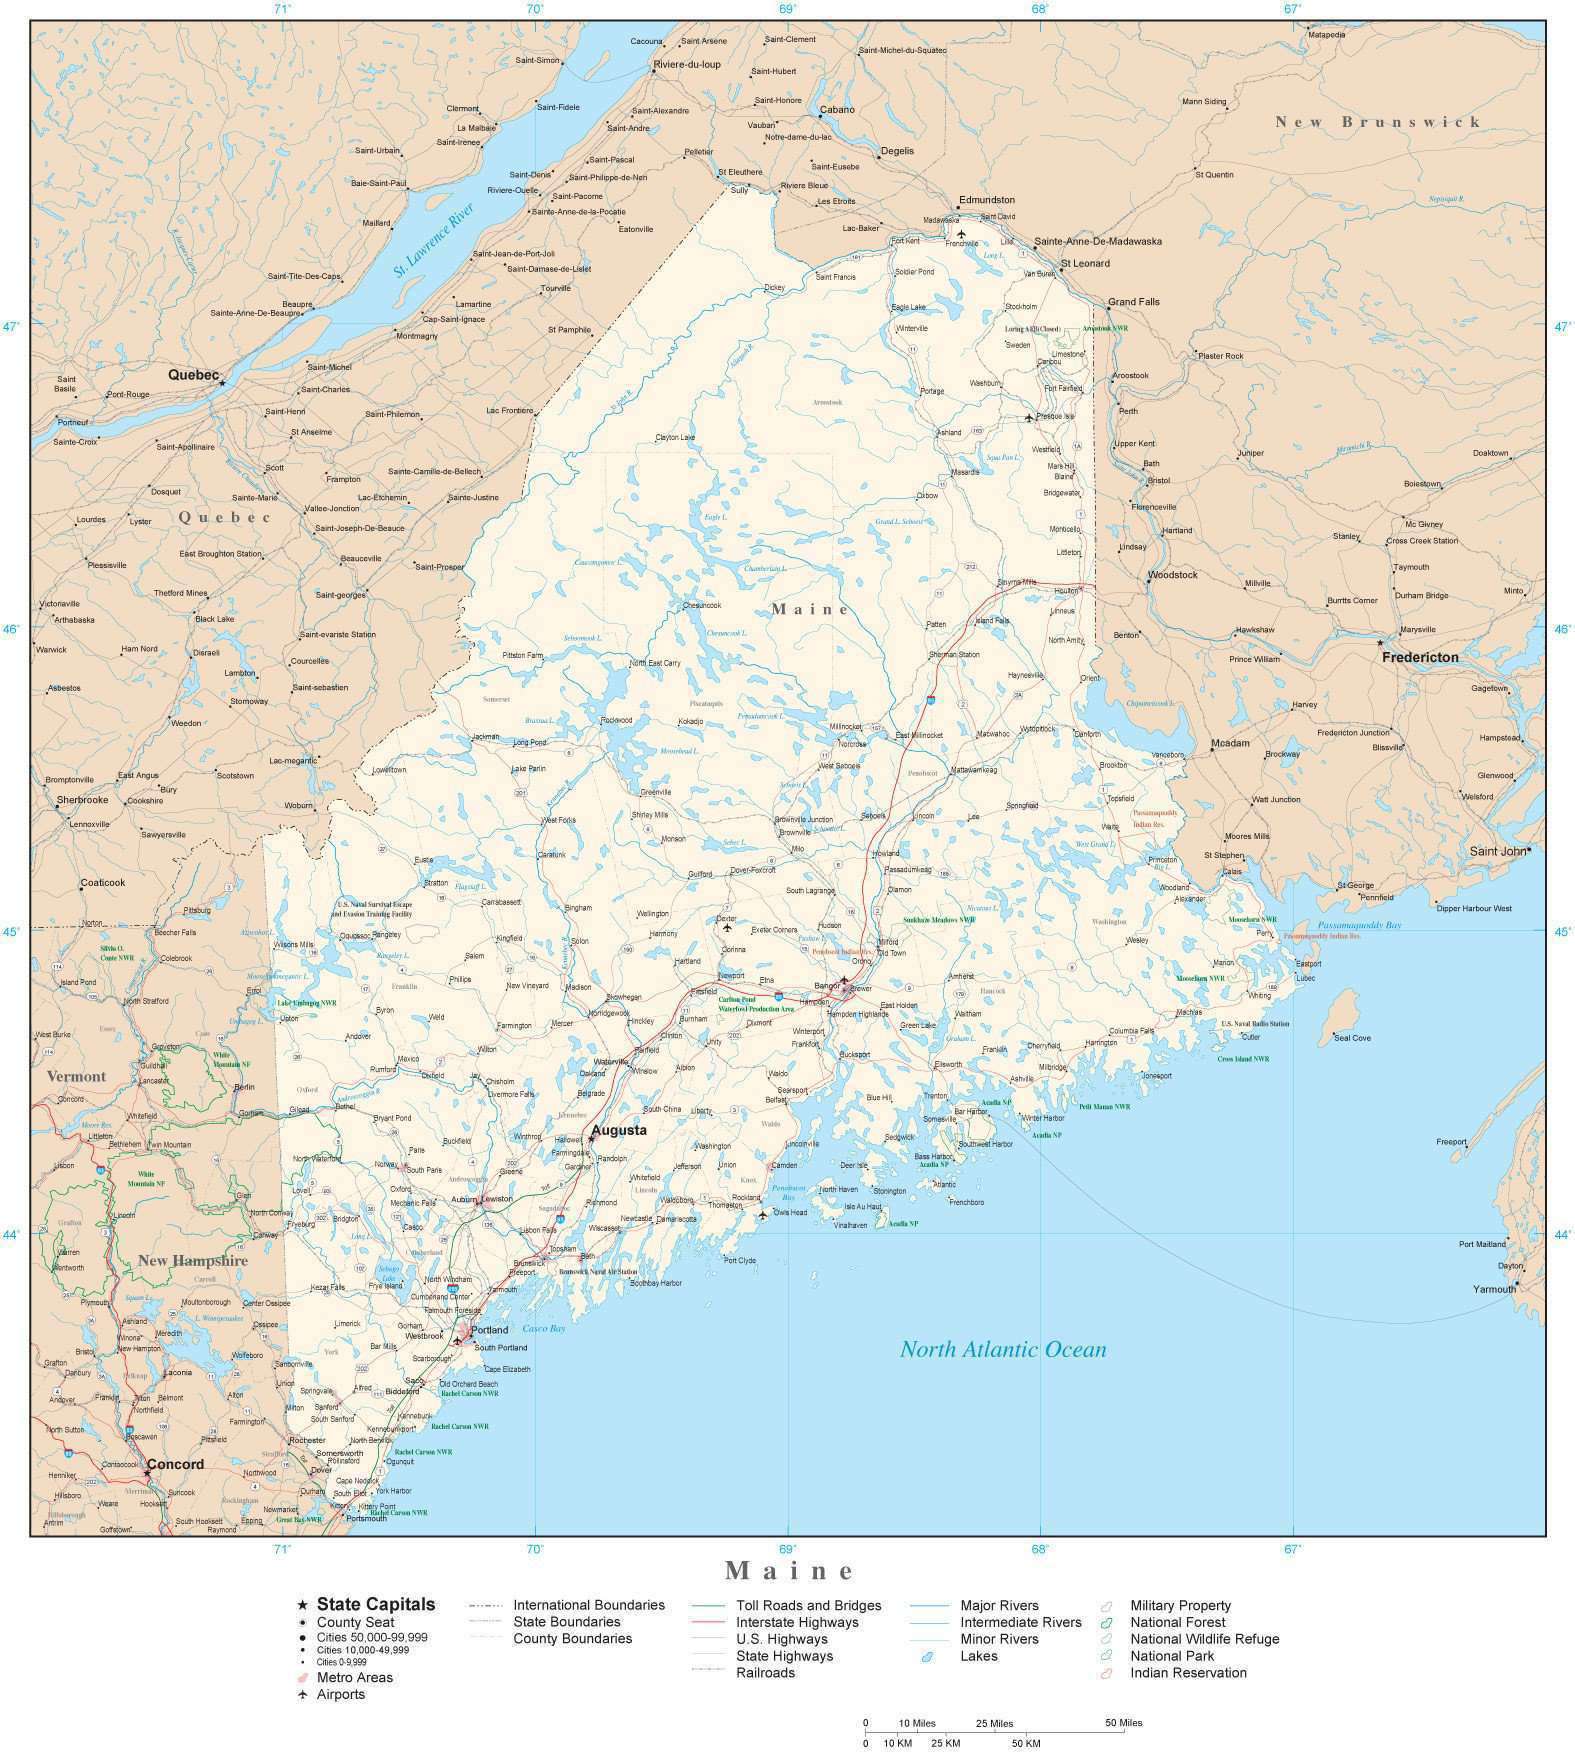 maine-detailed-map-in-adobe-illustrator-vector-format-detailed-editable-map-from-map-resources